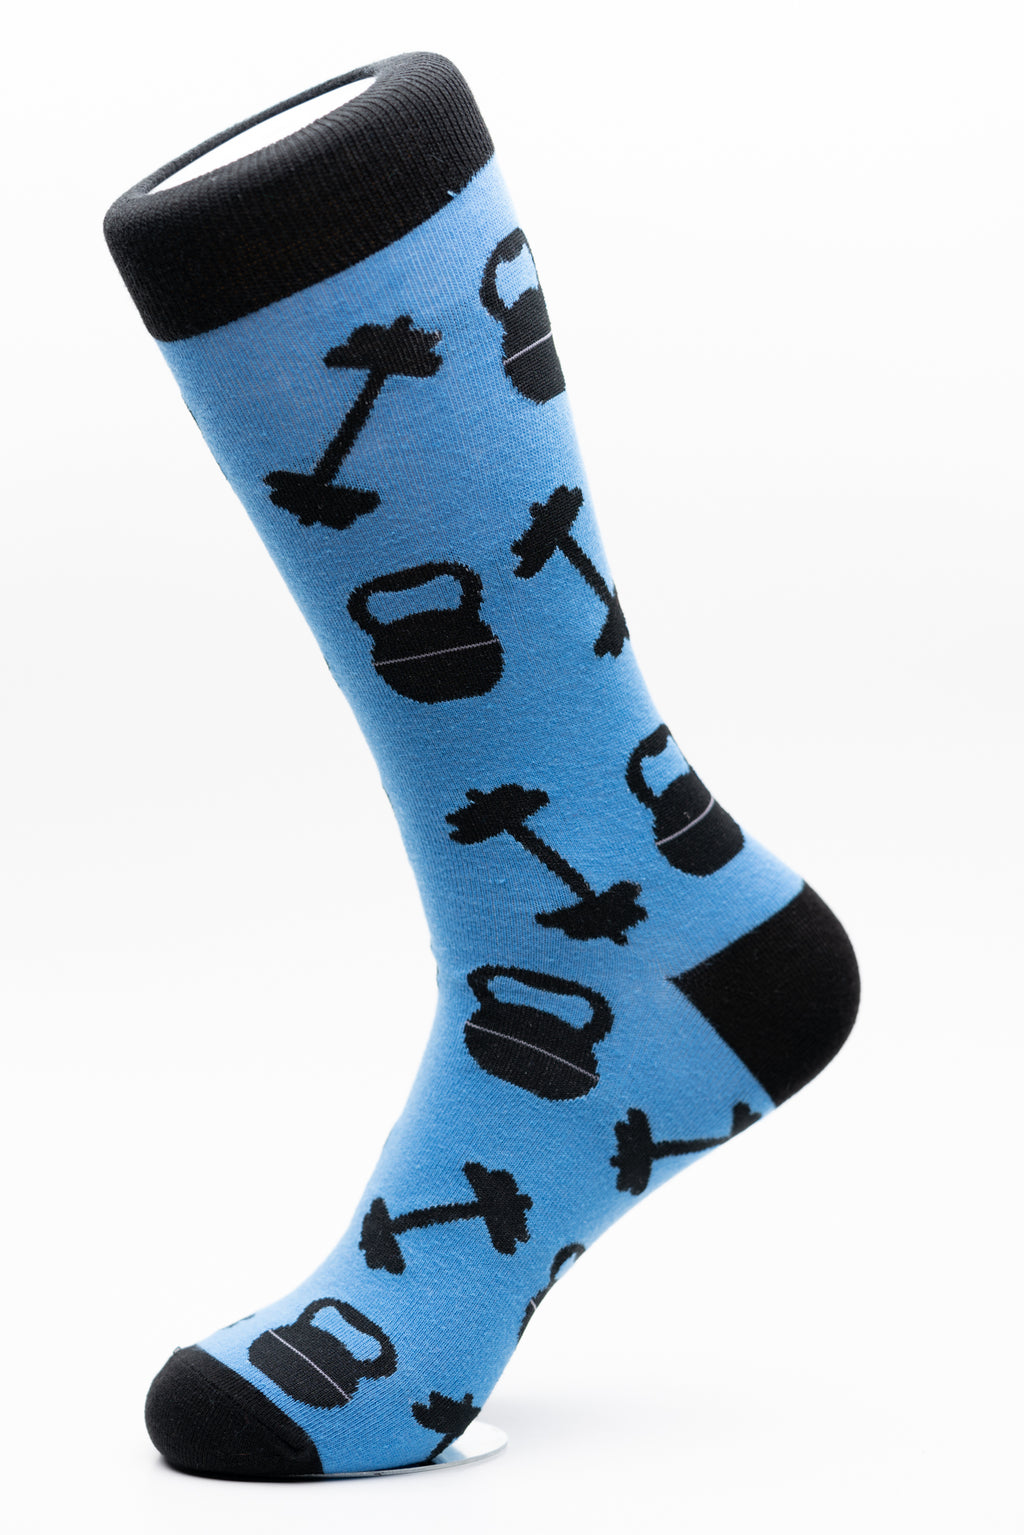 weight lifting funky crew socks kettle bells